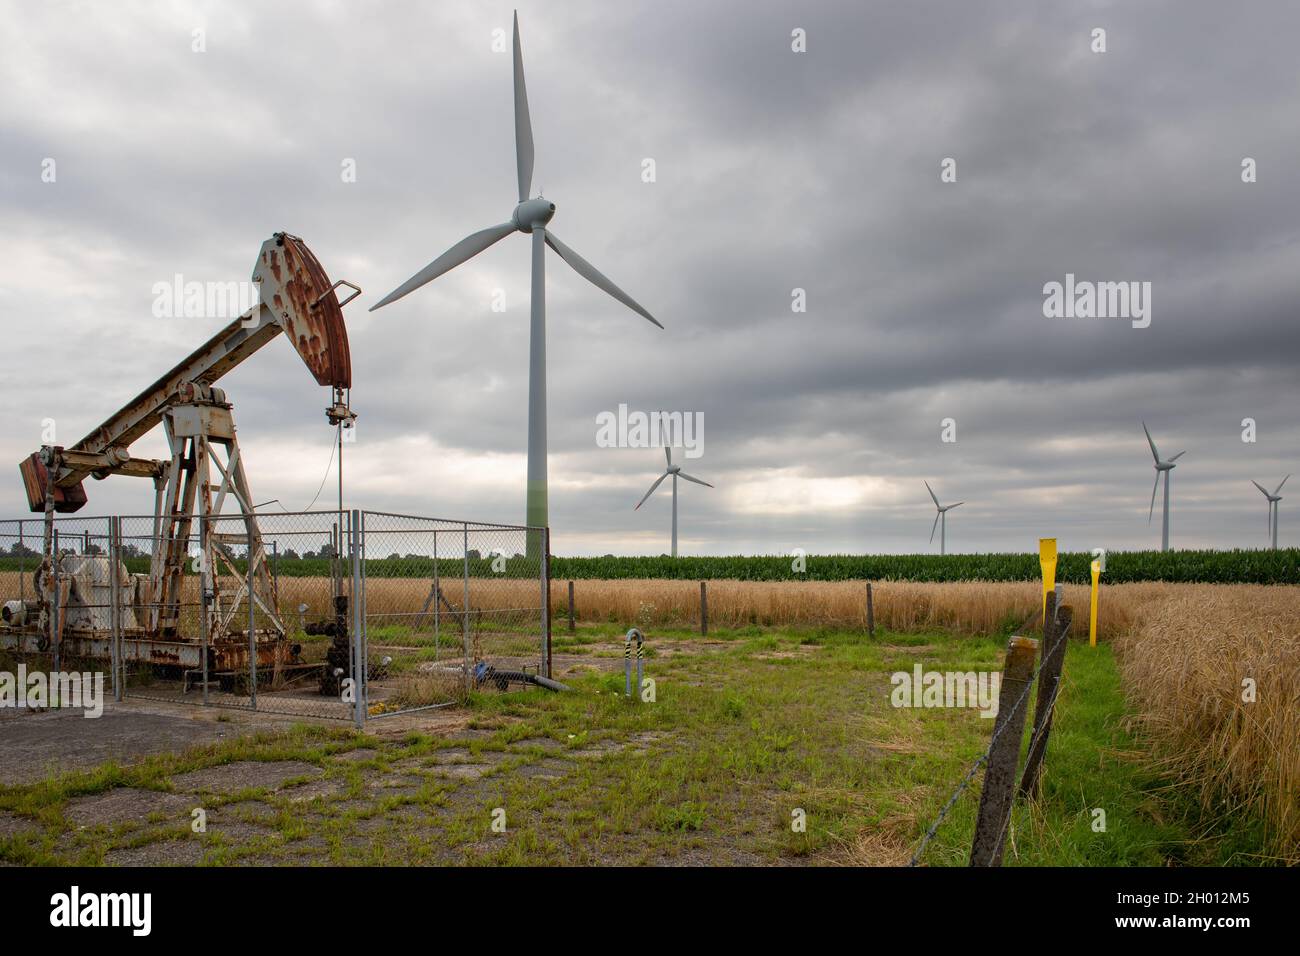 Old rusty oil hauling machines in front of modern wind turbines symbolizing energy transition at the face of climate change Stock Photo